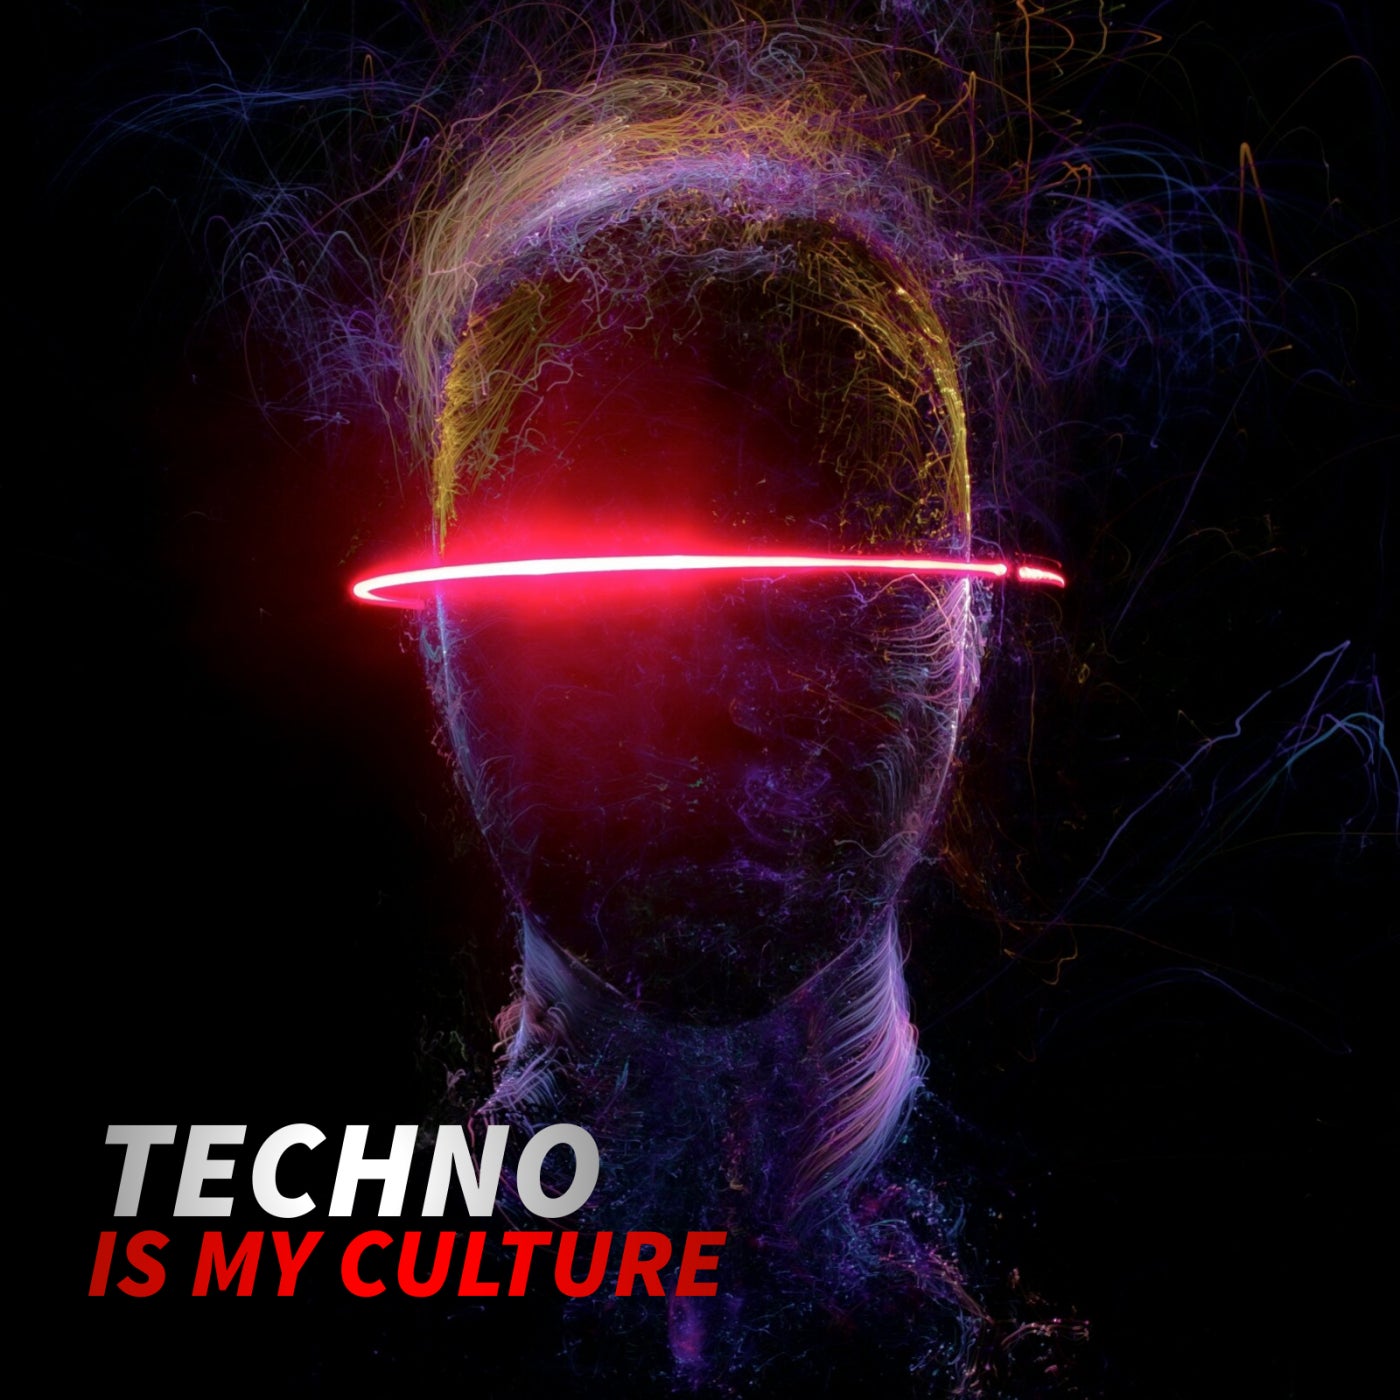 Techno is my culture